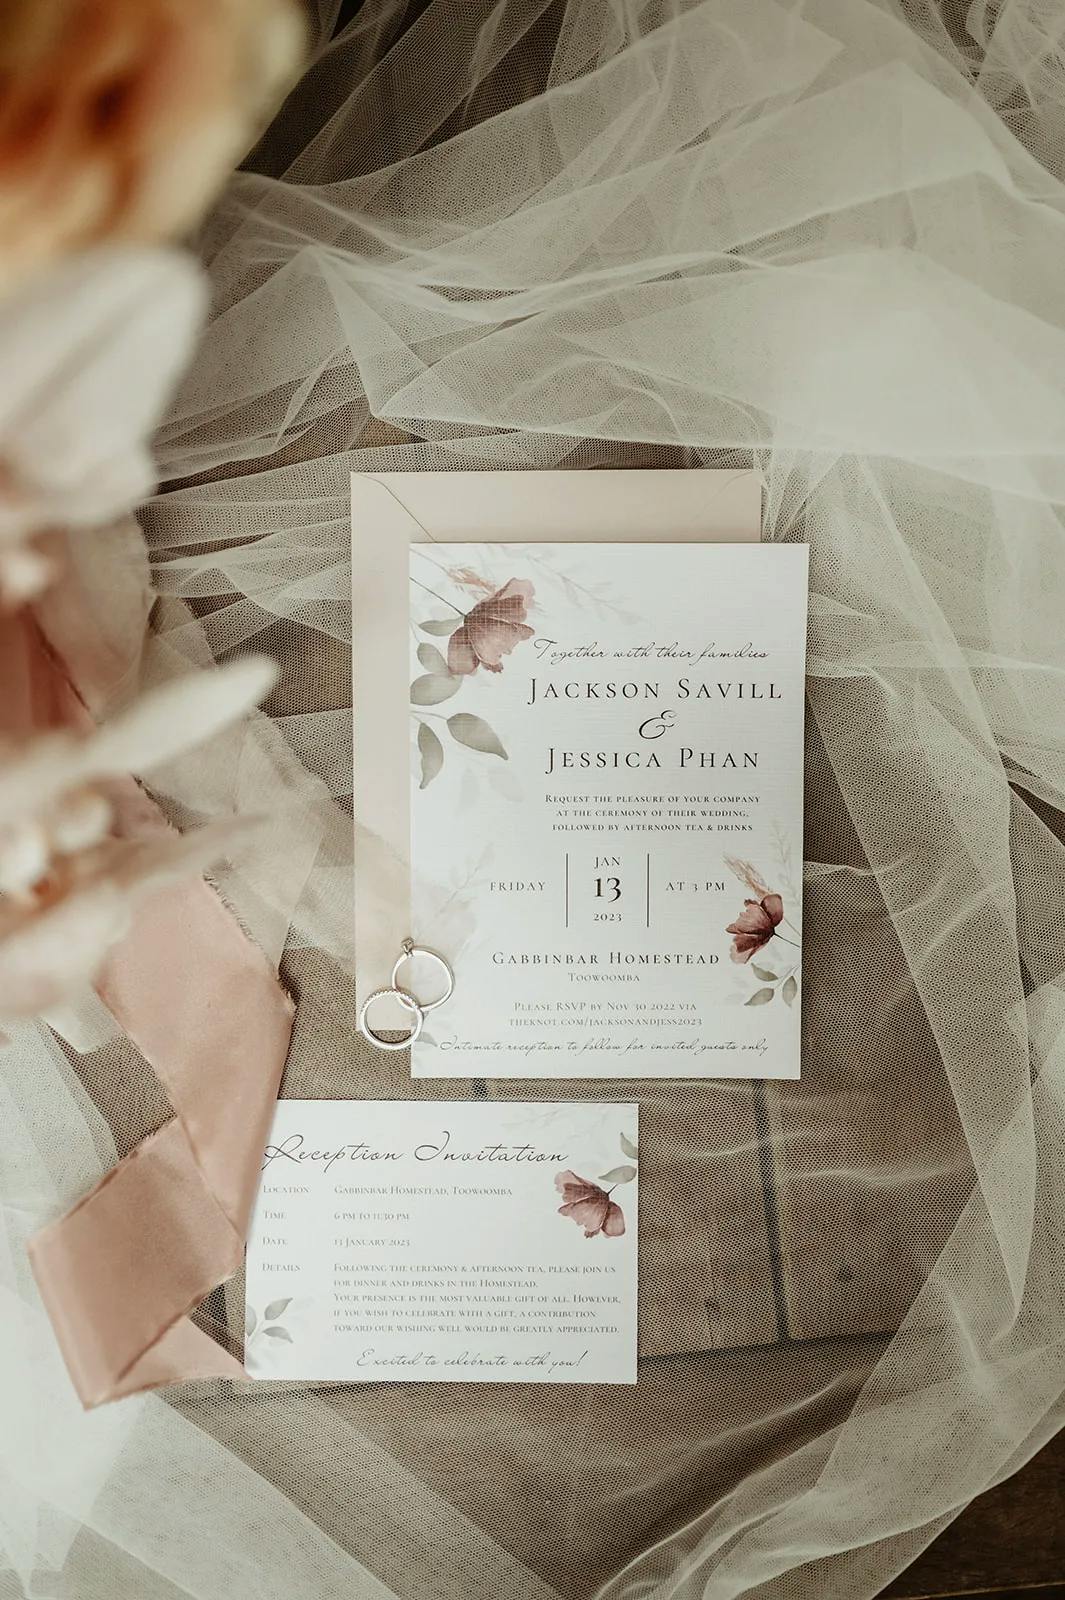 A wedding invitation set on a draped, sheer fabric. The invitation features names, "Jackson Savill & Jessica Phan," and details for the event on January 13th at Gardiner Homestead. Also shown are wedding rings and a smaller reception card.